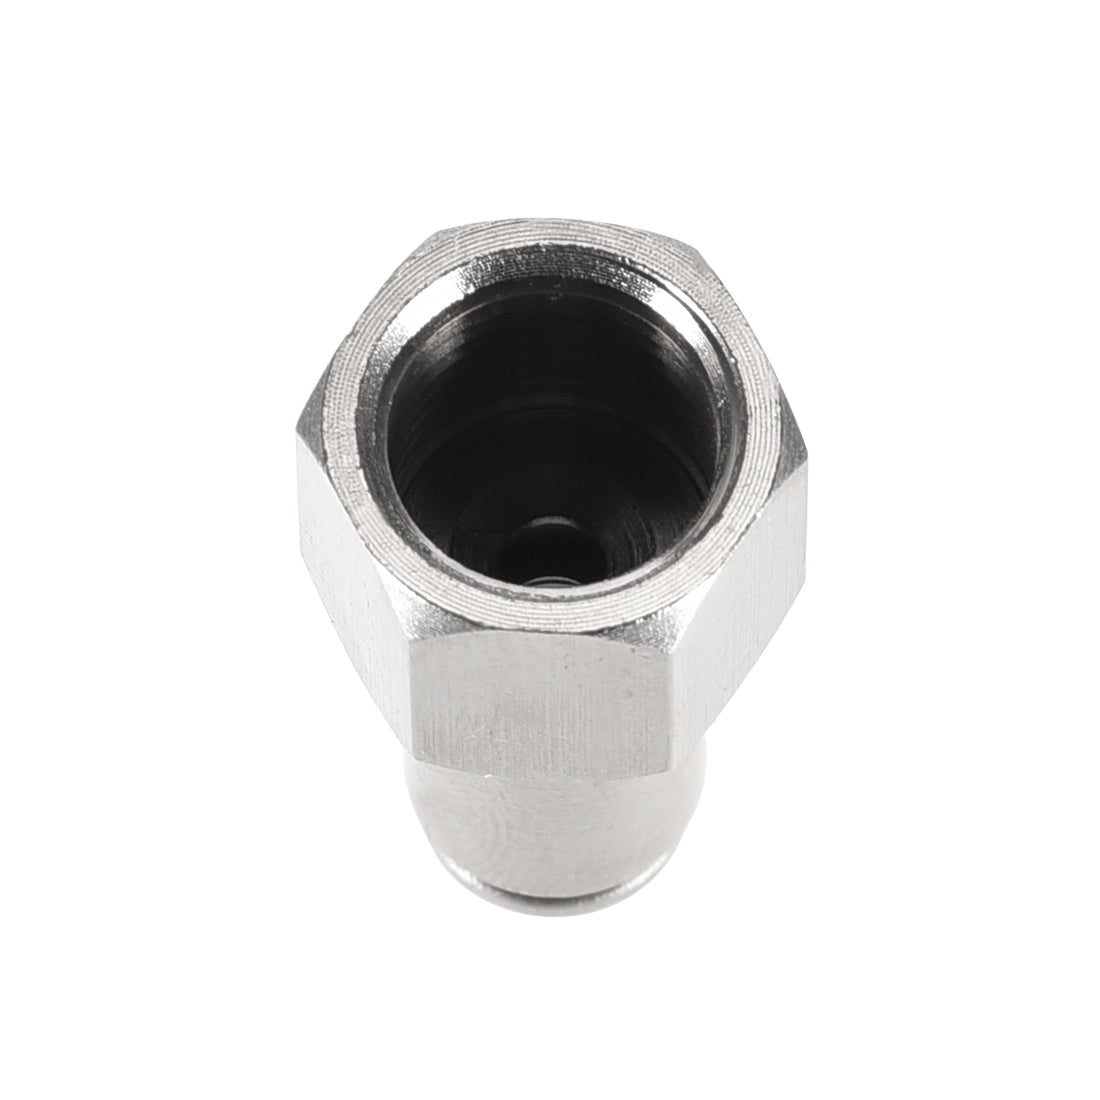 uxcell Uxcell Push to Connect Tube Fittings 4mm Tube OD x 1/8 PT Female Straight Pneumatic Connector Pipe Fitting Silver Tone 2Pcs